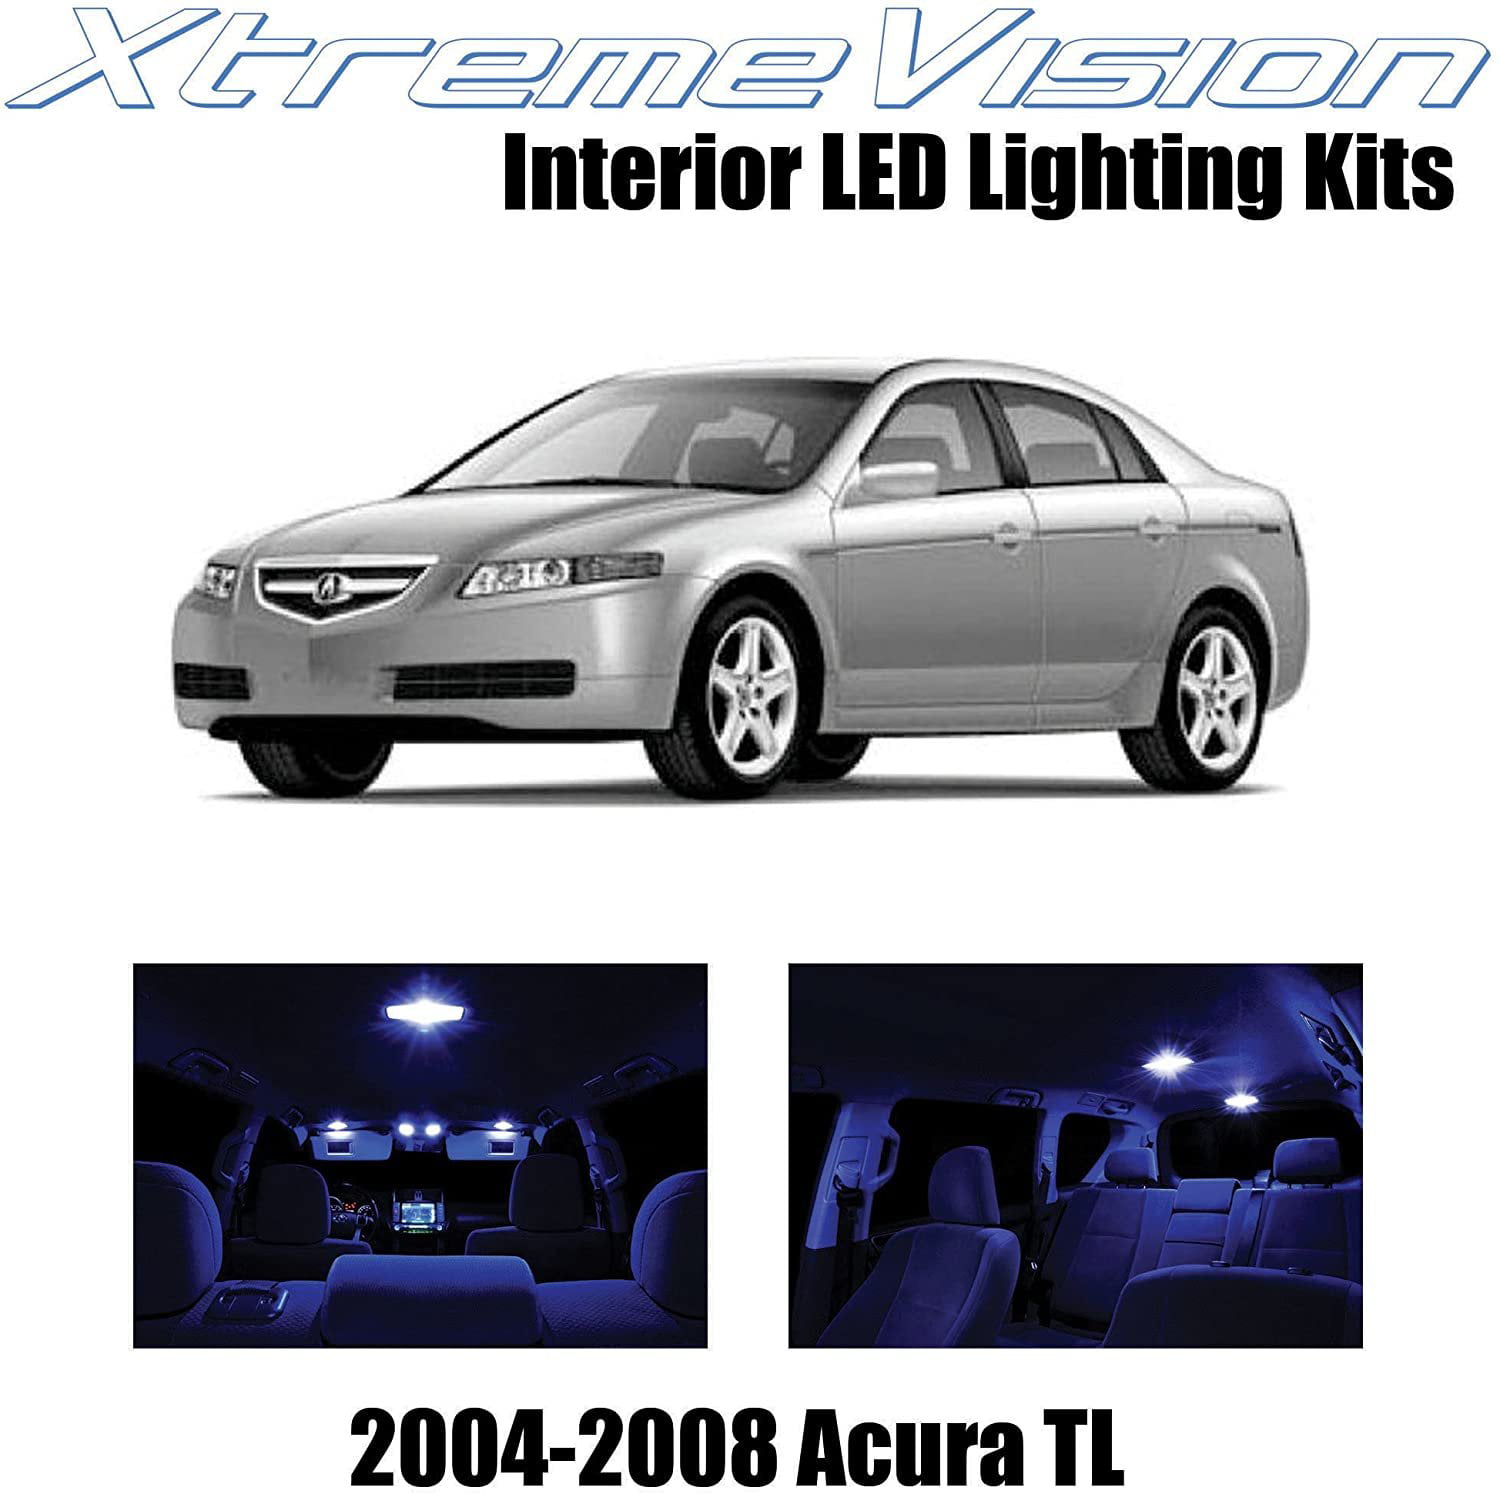 Tool 11 x Premium Blue LED Lights Interior Package Kit for Acura TL 2004-2008 